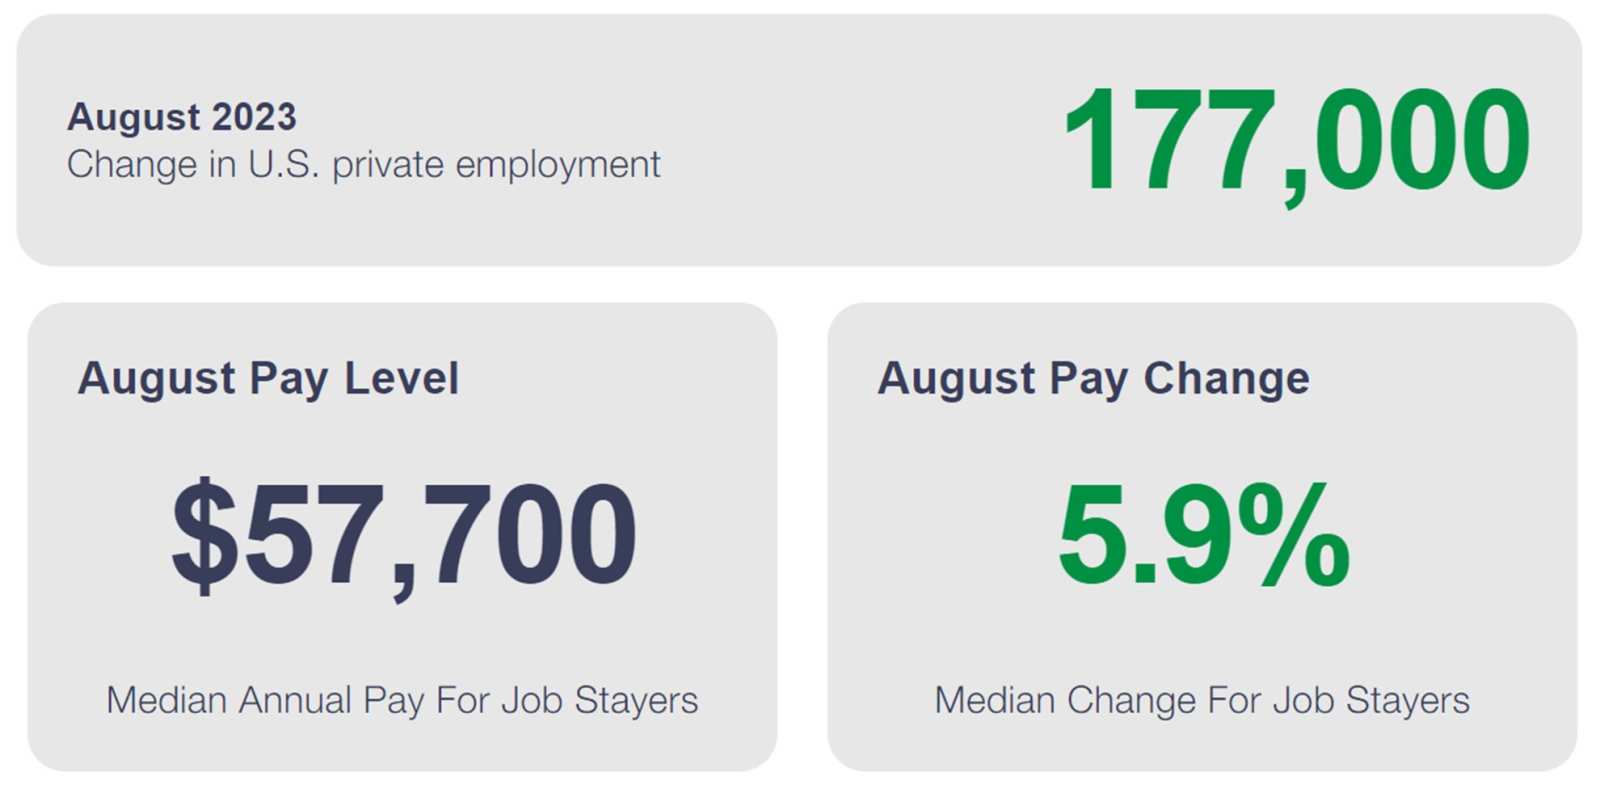 The ADP employment report showed that job creation slowed, falling from 371,000 in July to 177,000 August & missing expectations of 200,000. The report showed t...